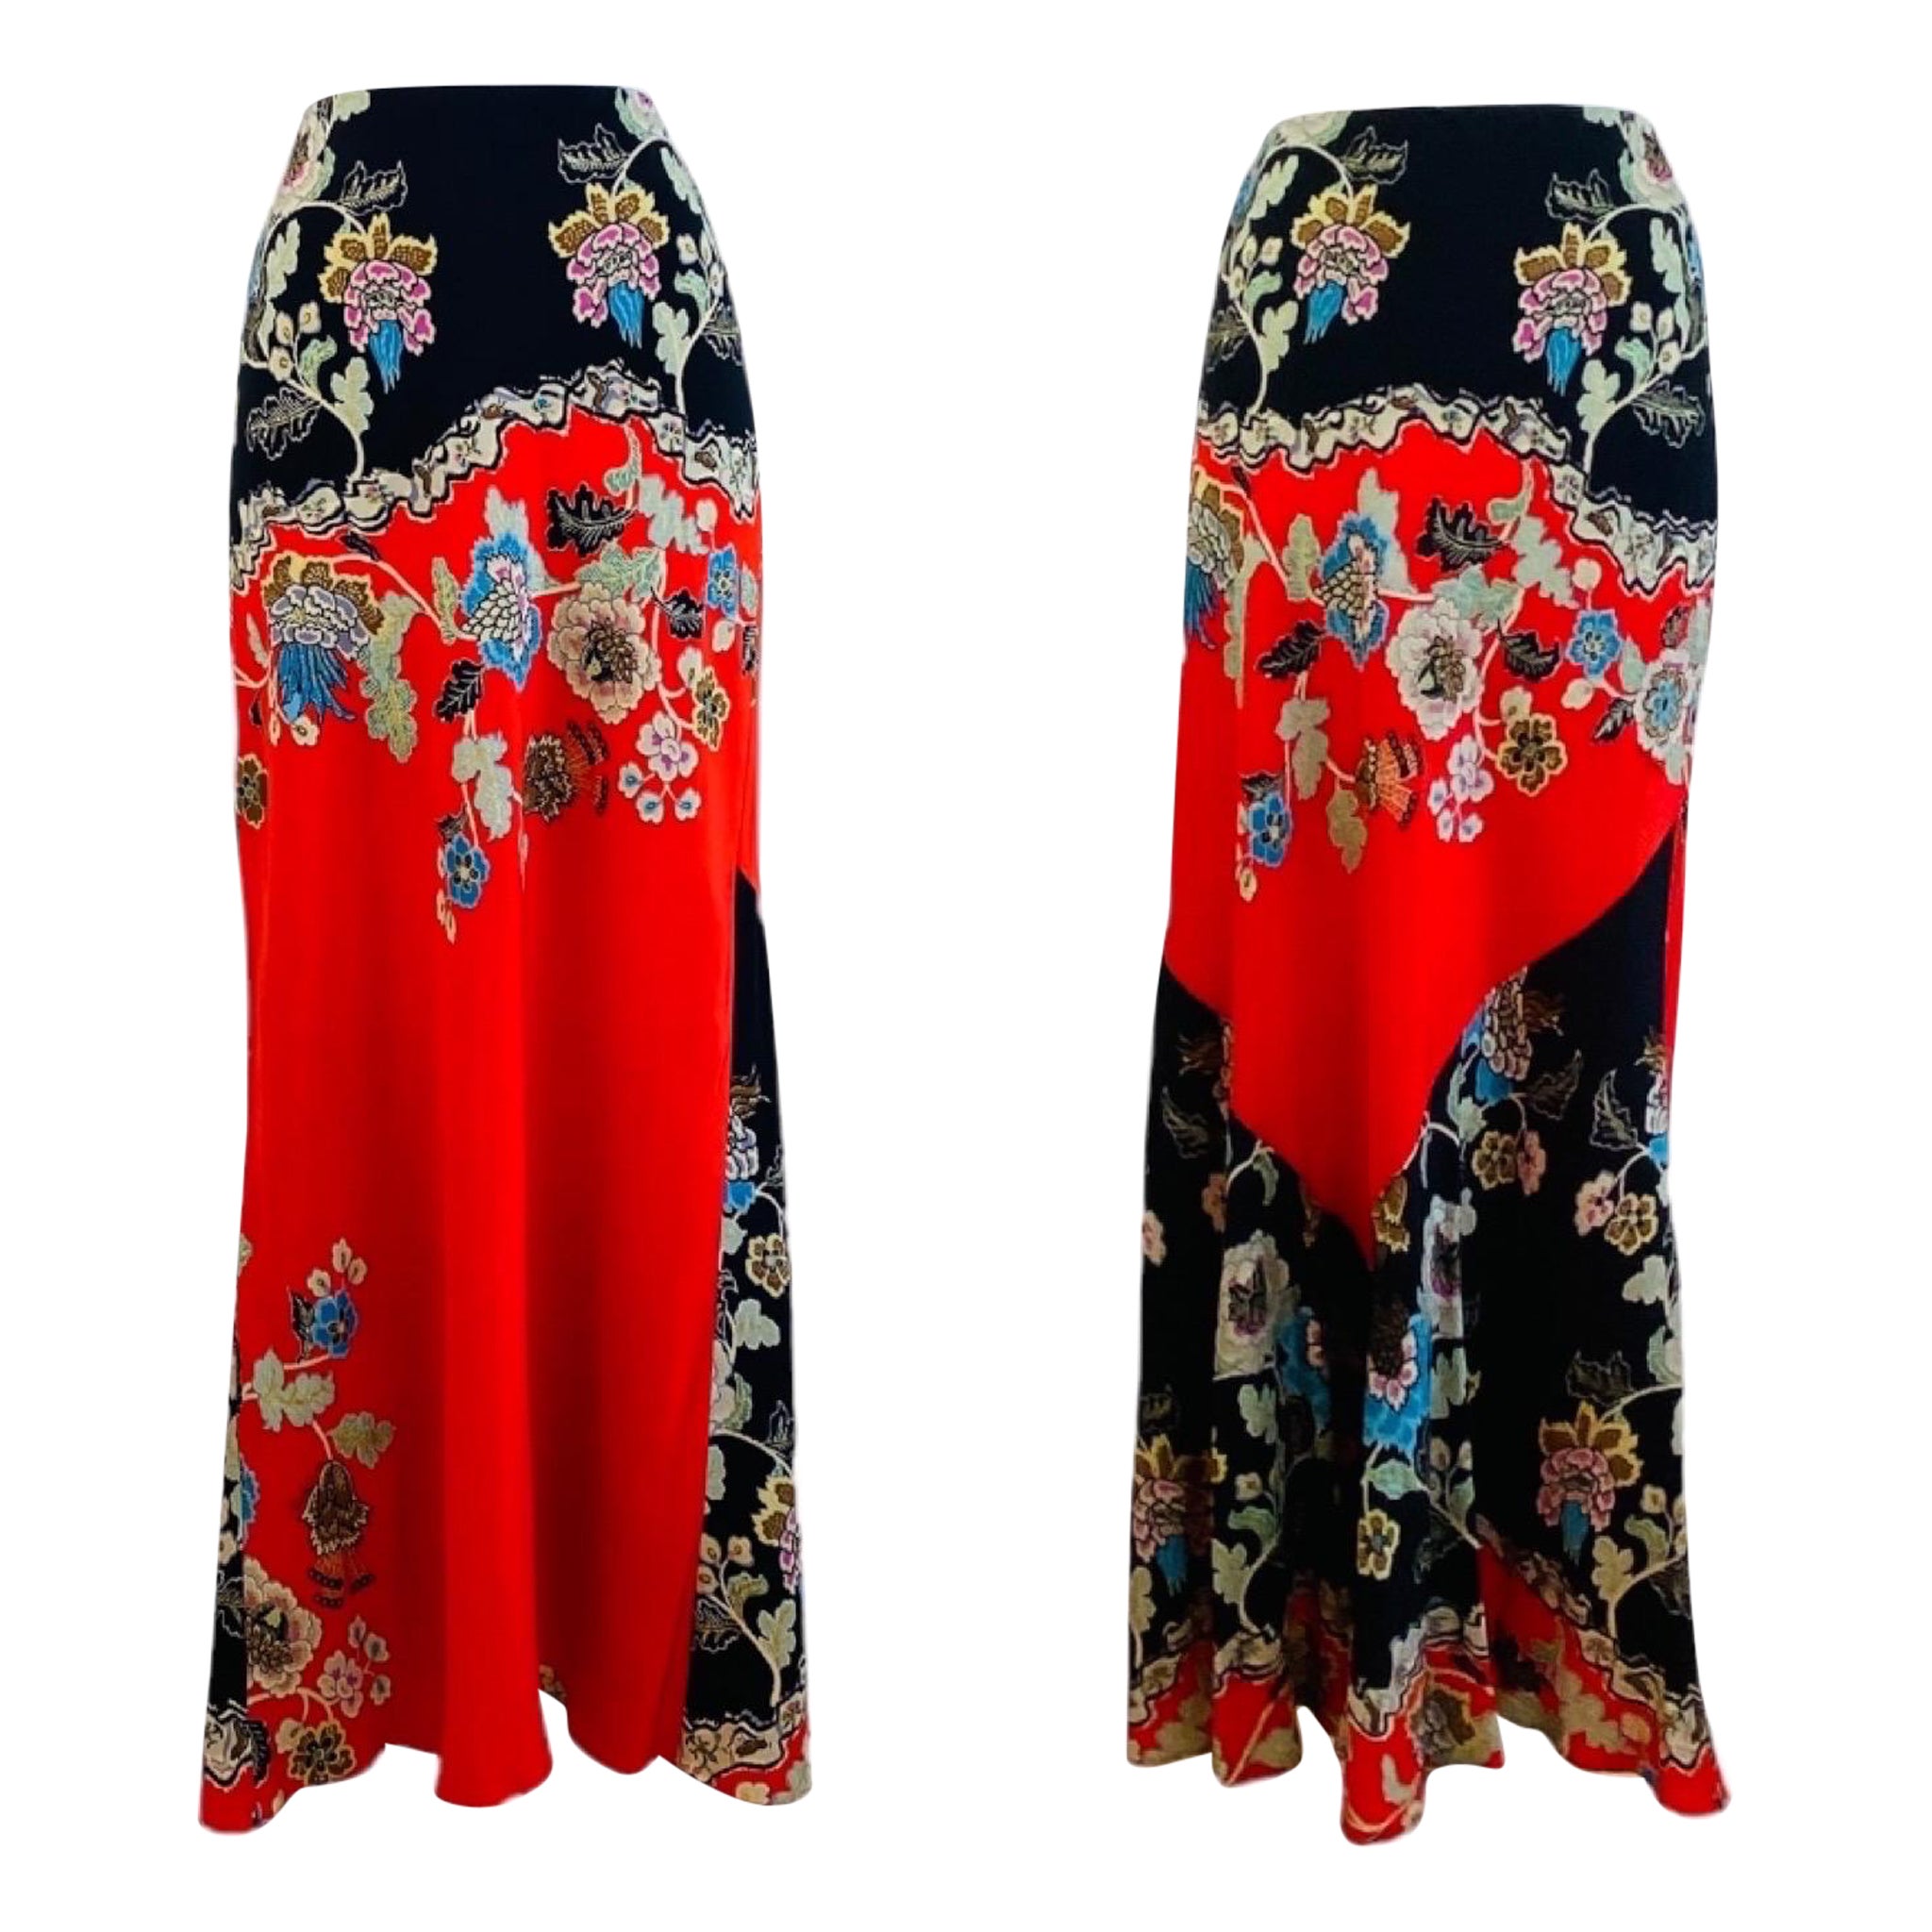 Vintage Roberto Cavalli S/S 2003 Chinoiserie Black + Red Floral Maxi Skirt For Sale